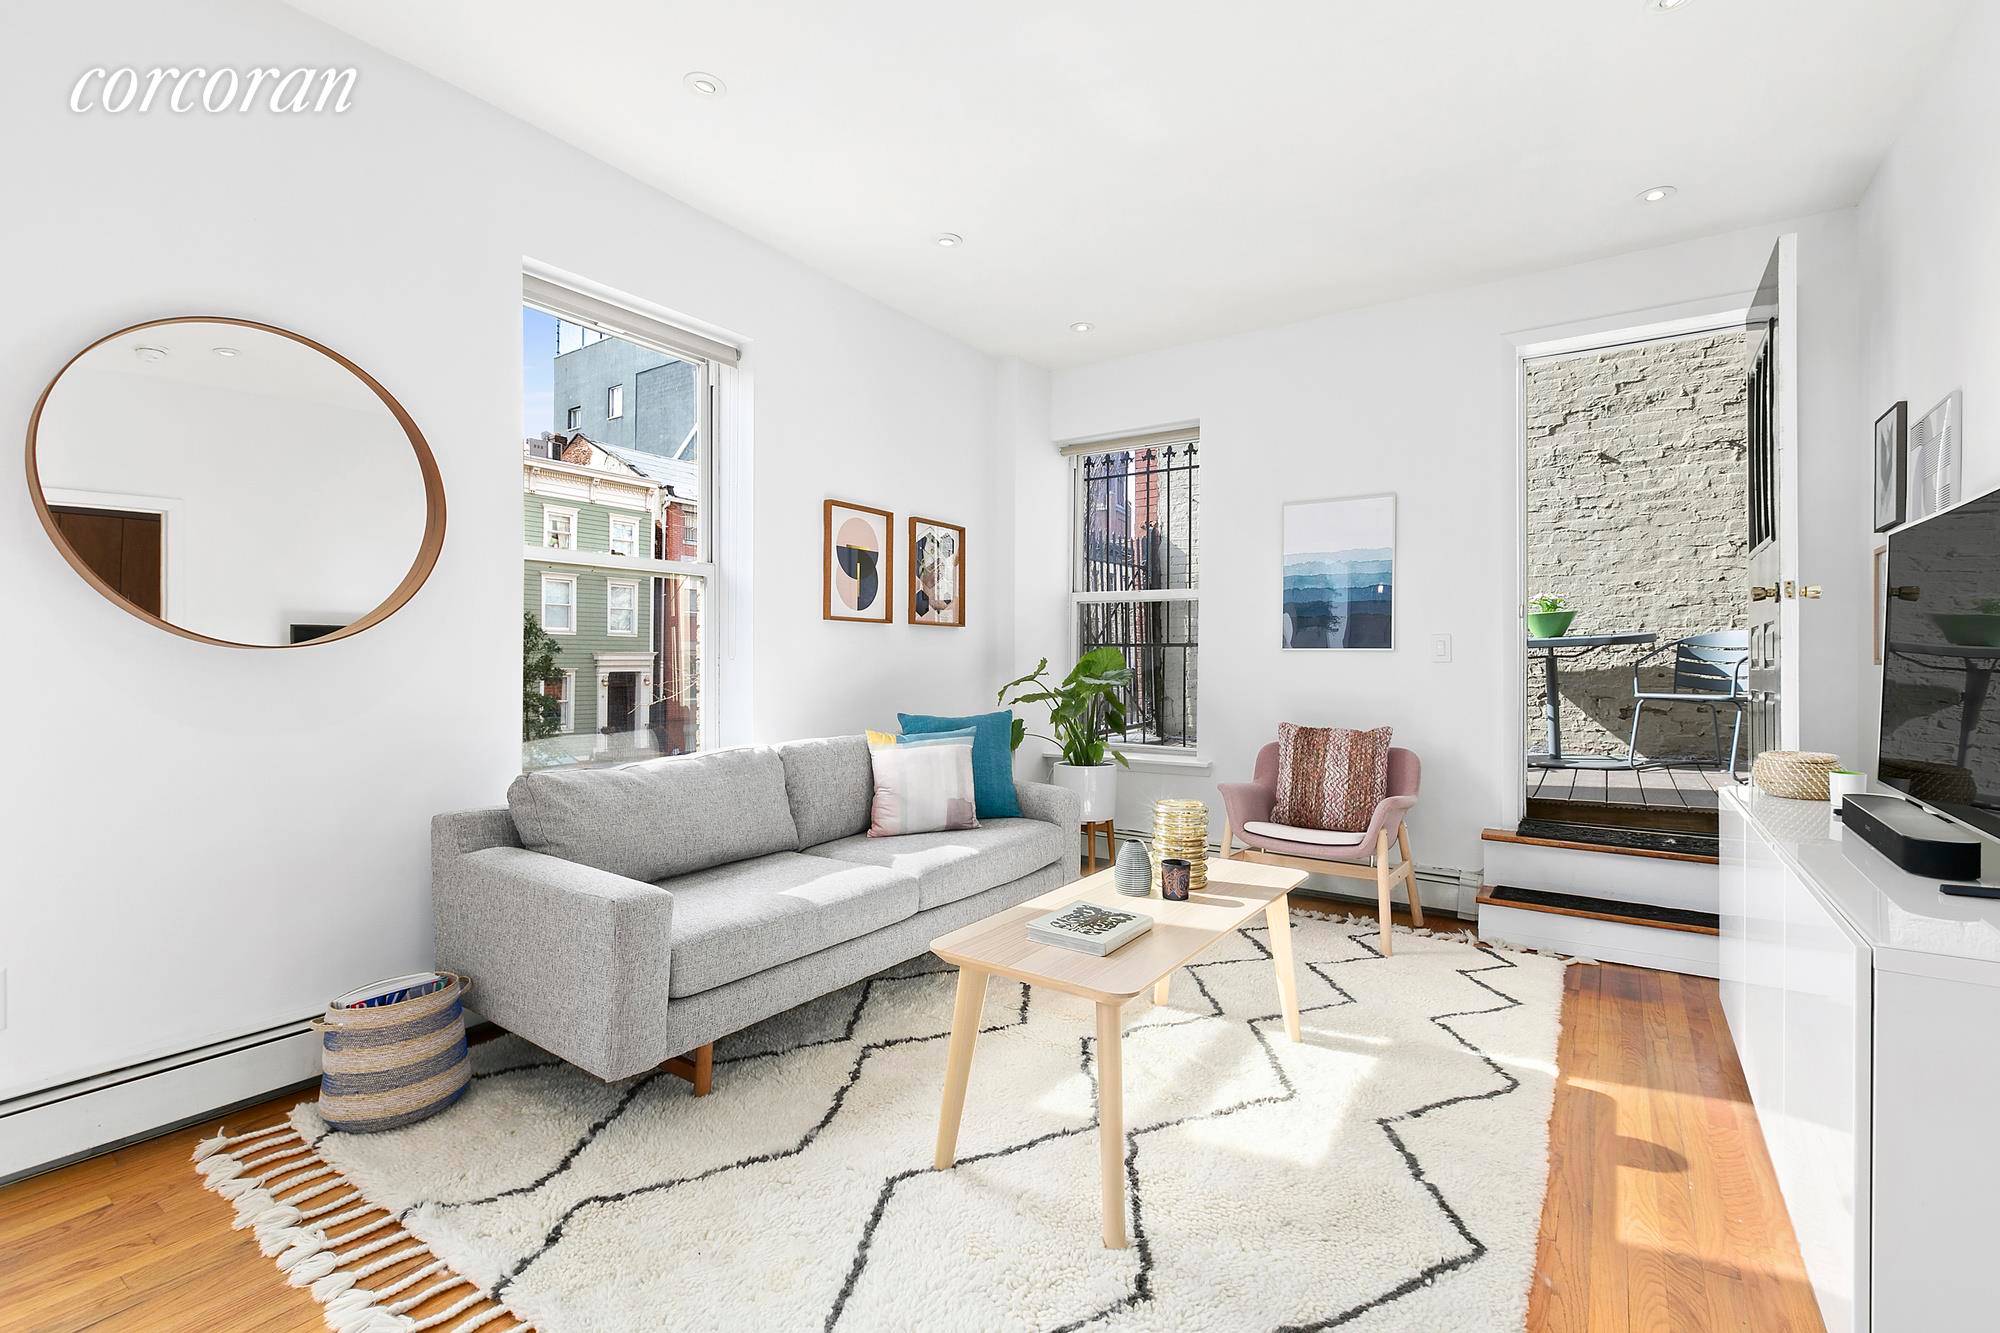 This south facing fully renovated one bedroom condominium rental with a terrace is on the border of two of Brooklyn's most coveted neighborhoods Cobble Hill and Boerum Hill.